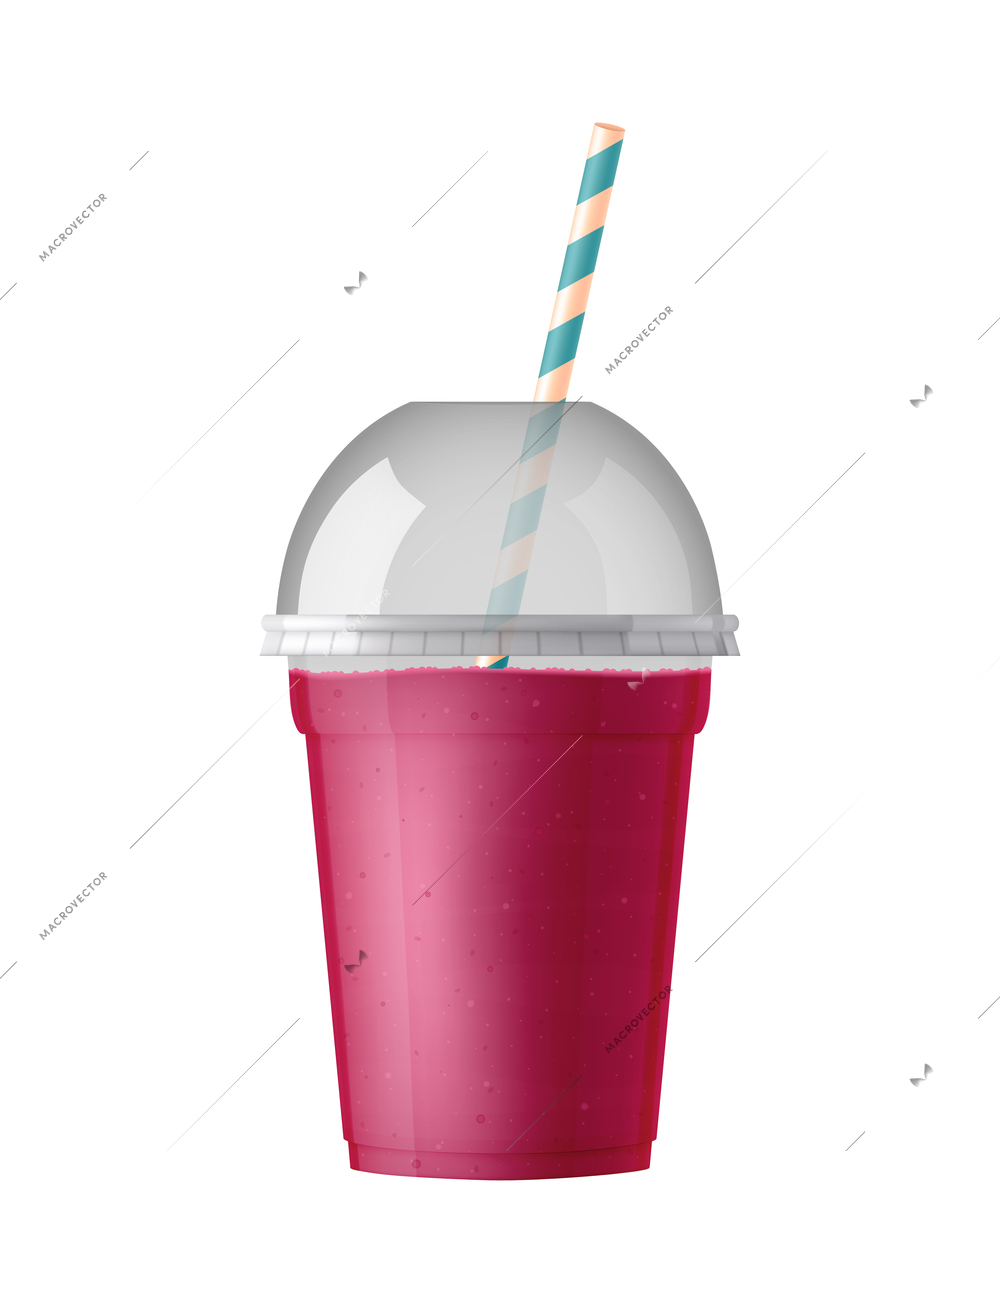 Takeout fastfood package realistic composition with isolated front view of takeaway disposable with cocktail vector illustration